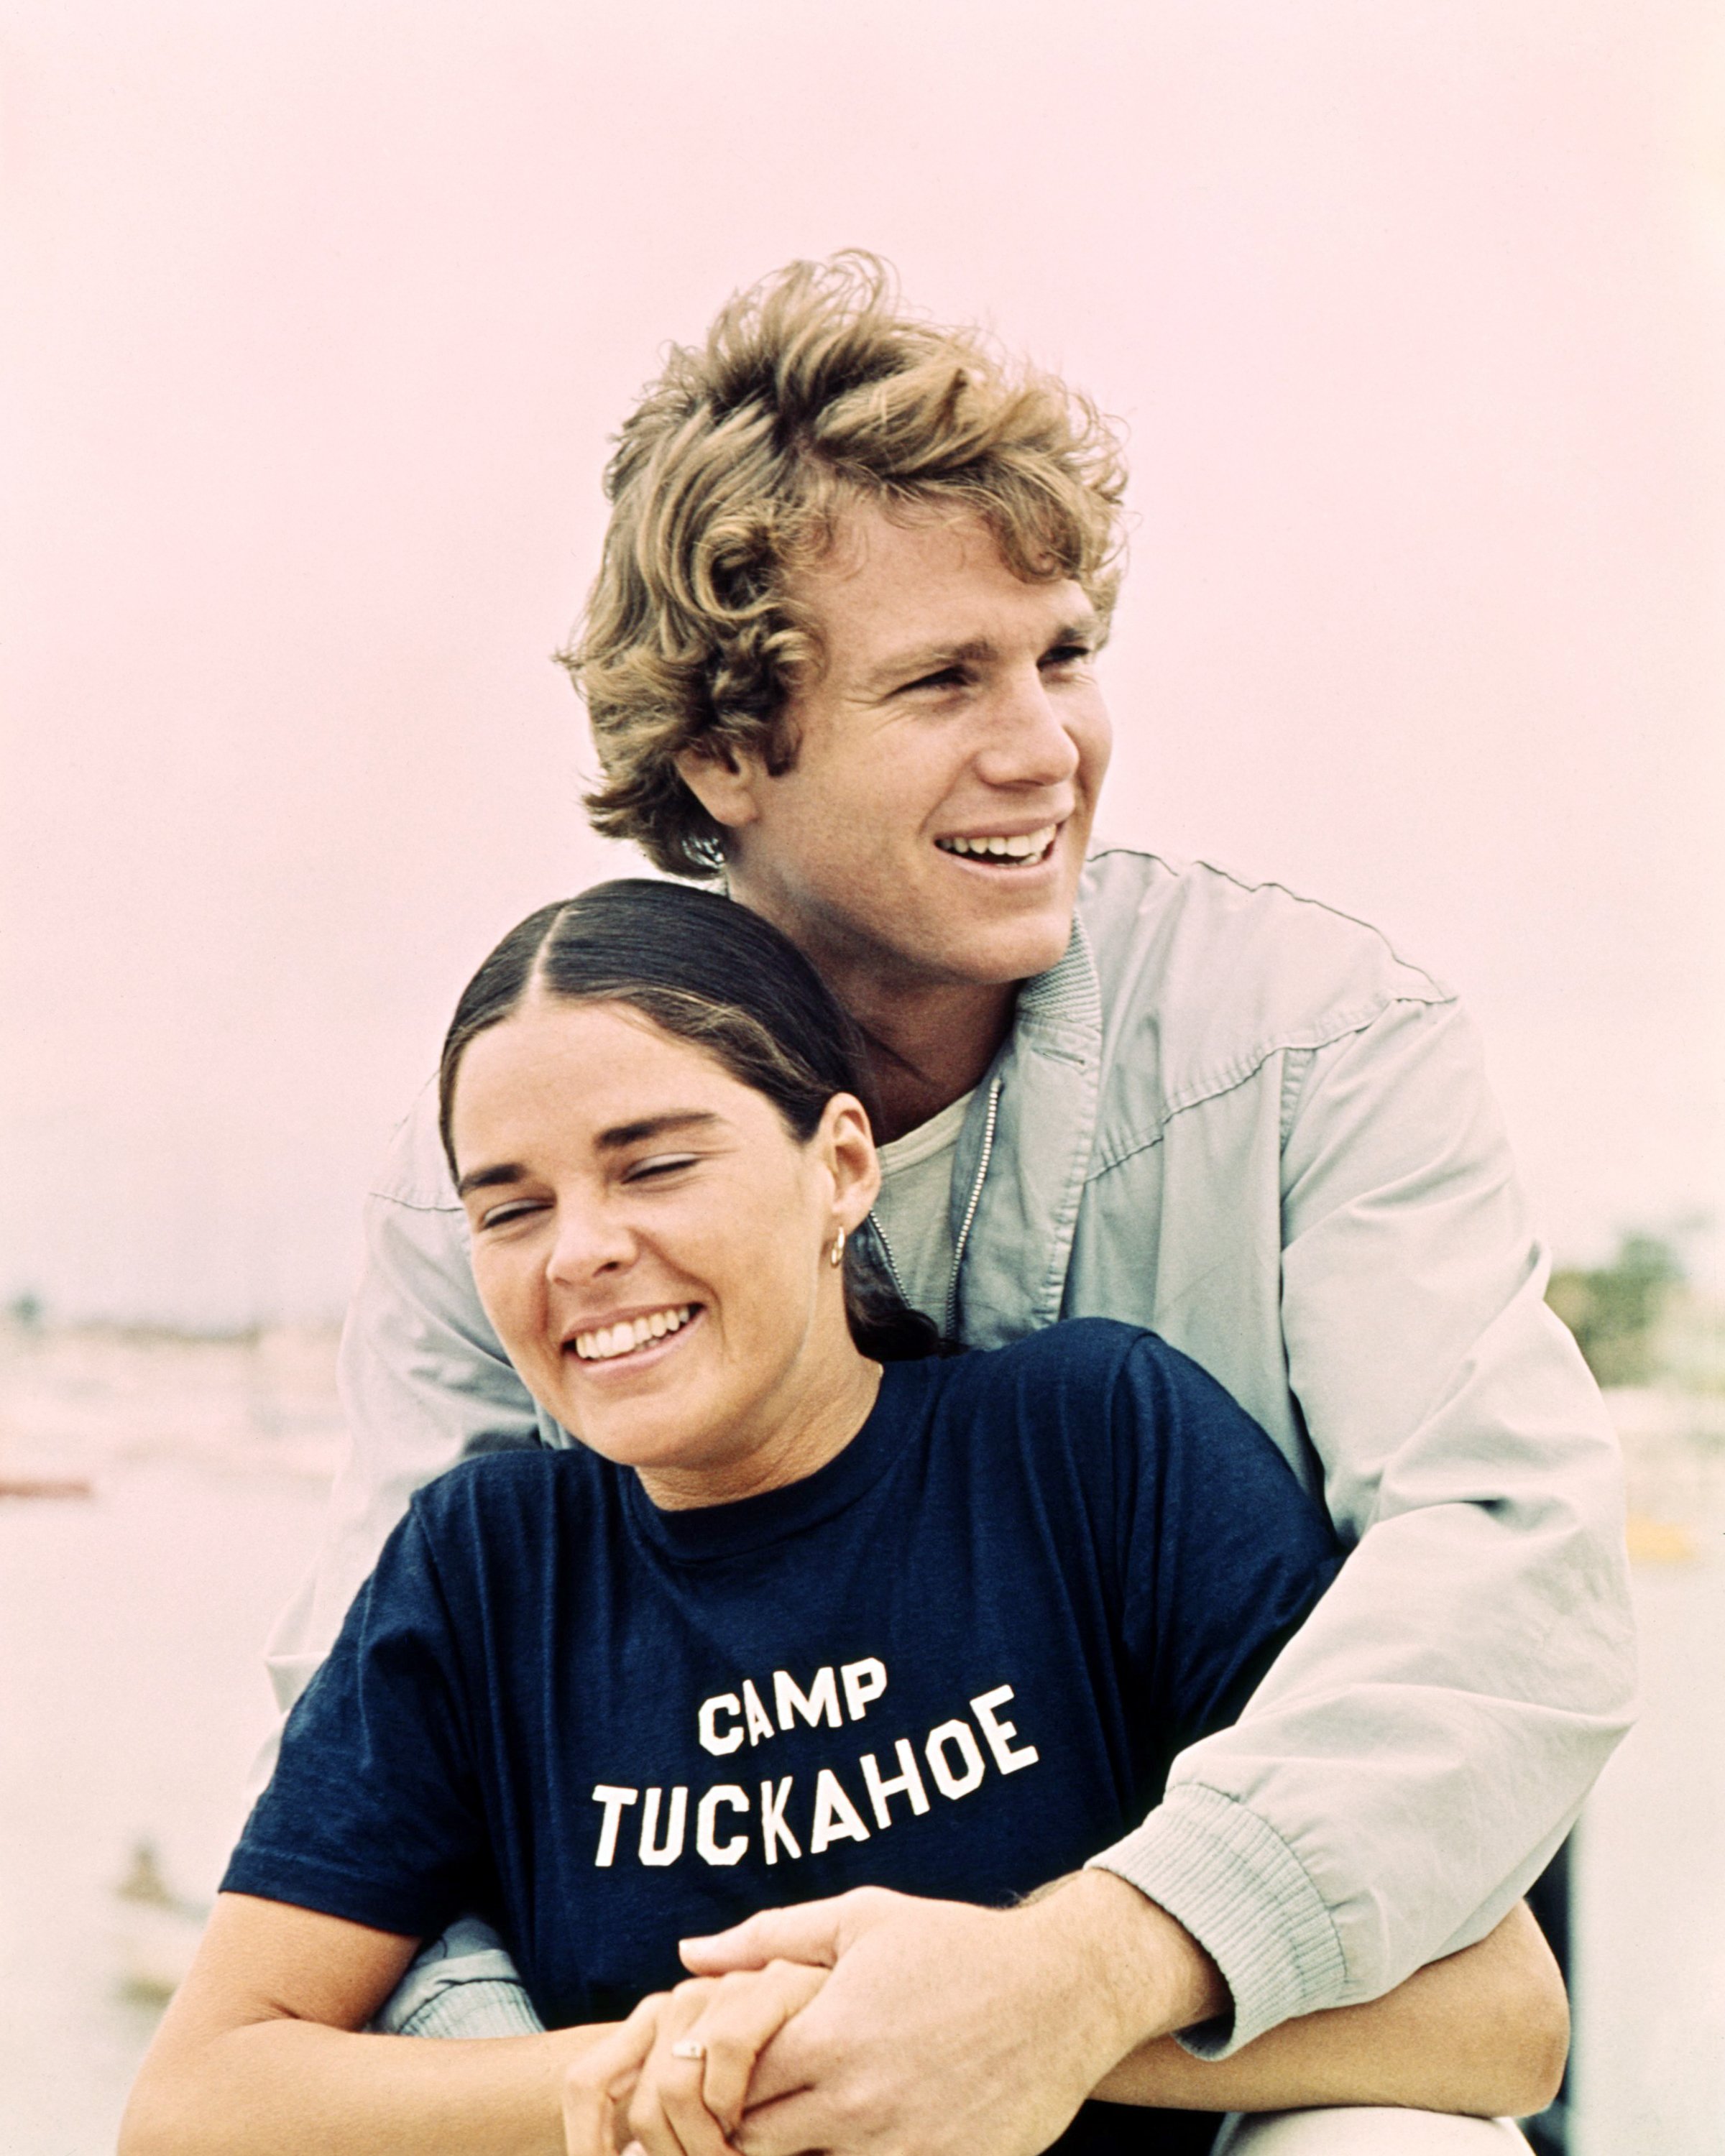 Actor Ryan O'Neal and Ali MacGraw photographed in a promotional portrait for the classic movie "Love Story" in 1970. | Source: Getty Images